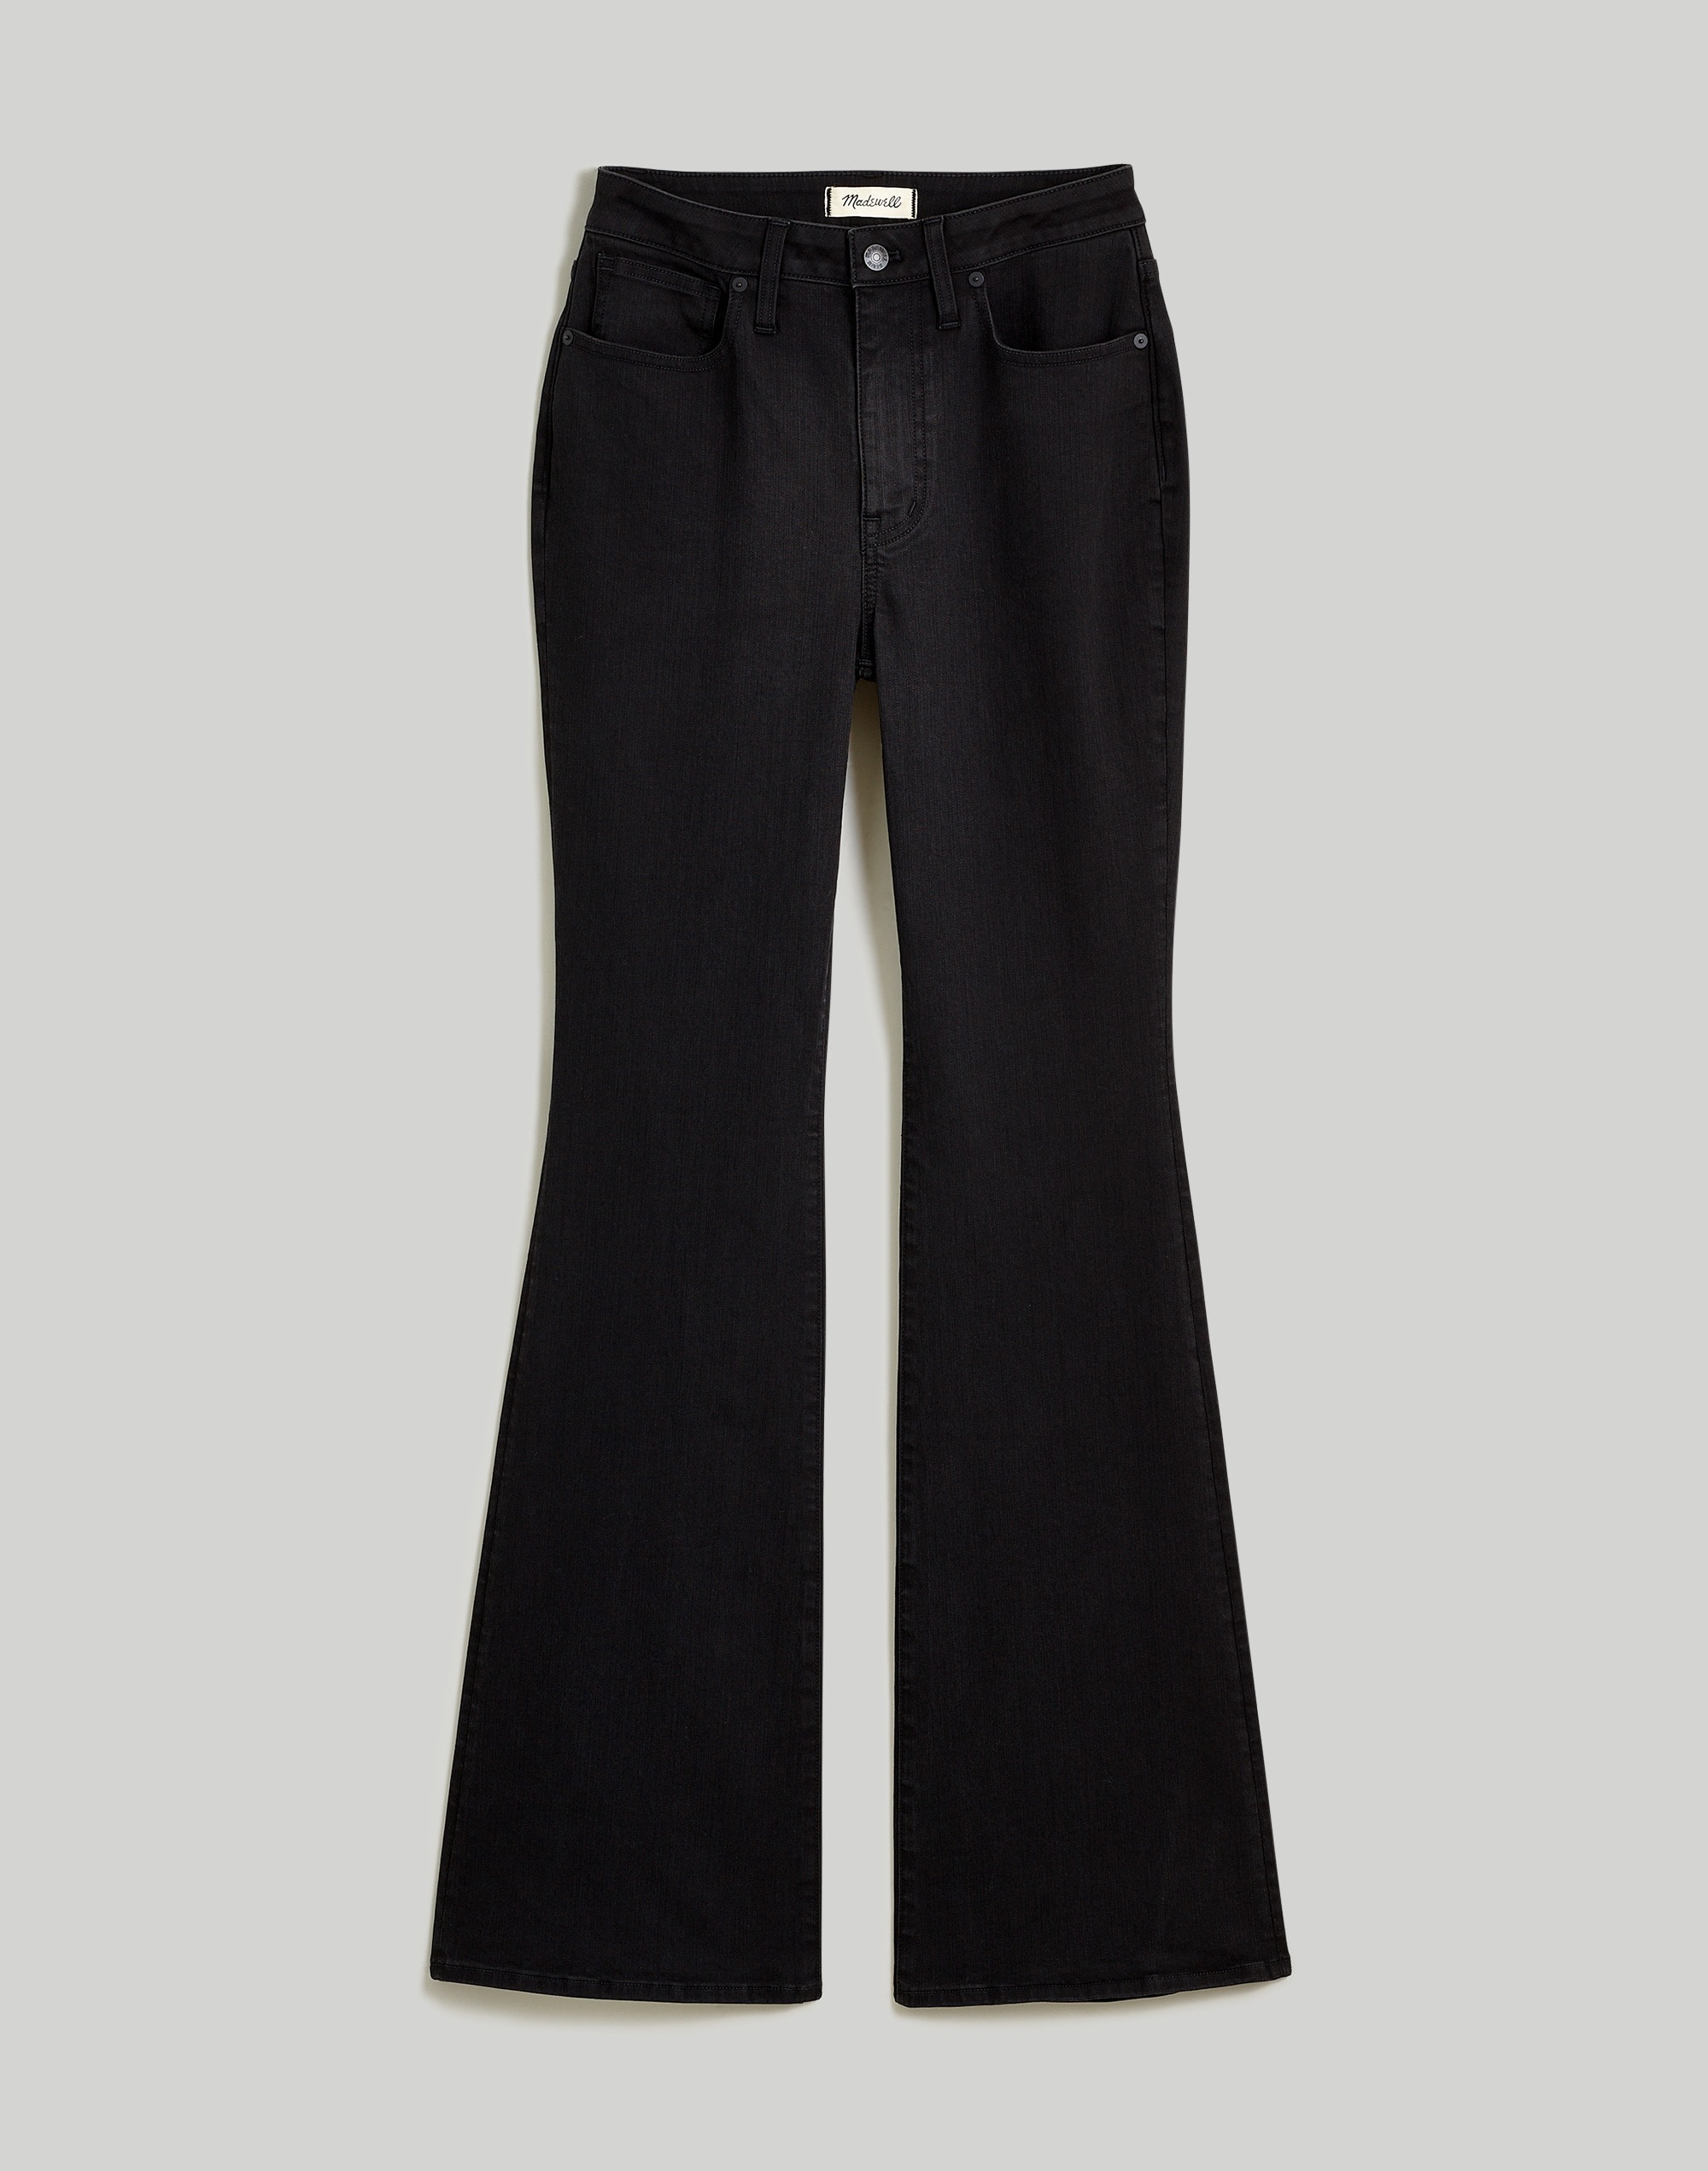 Curvy Skinny Flare Jeans in Black Frost Wash